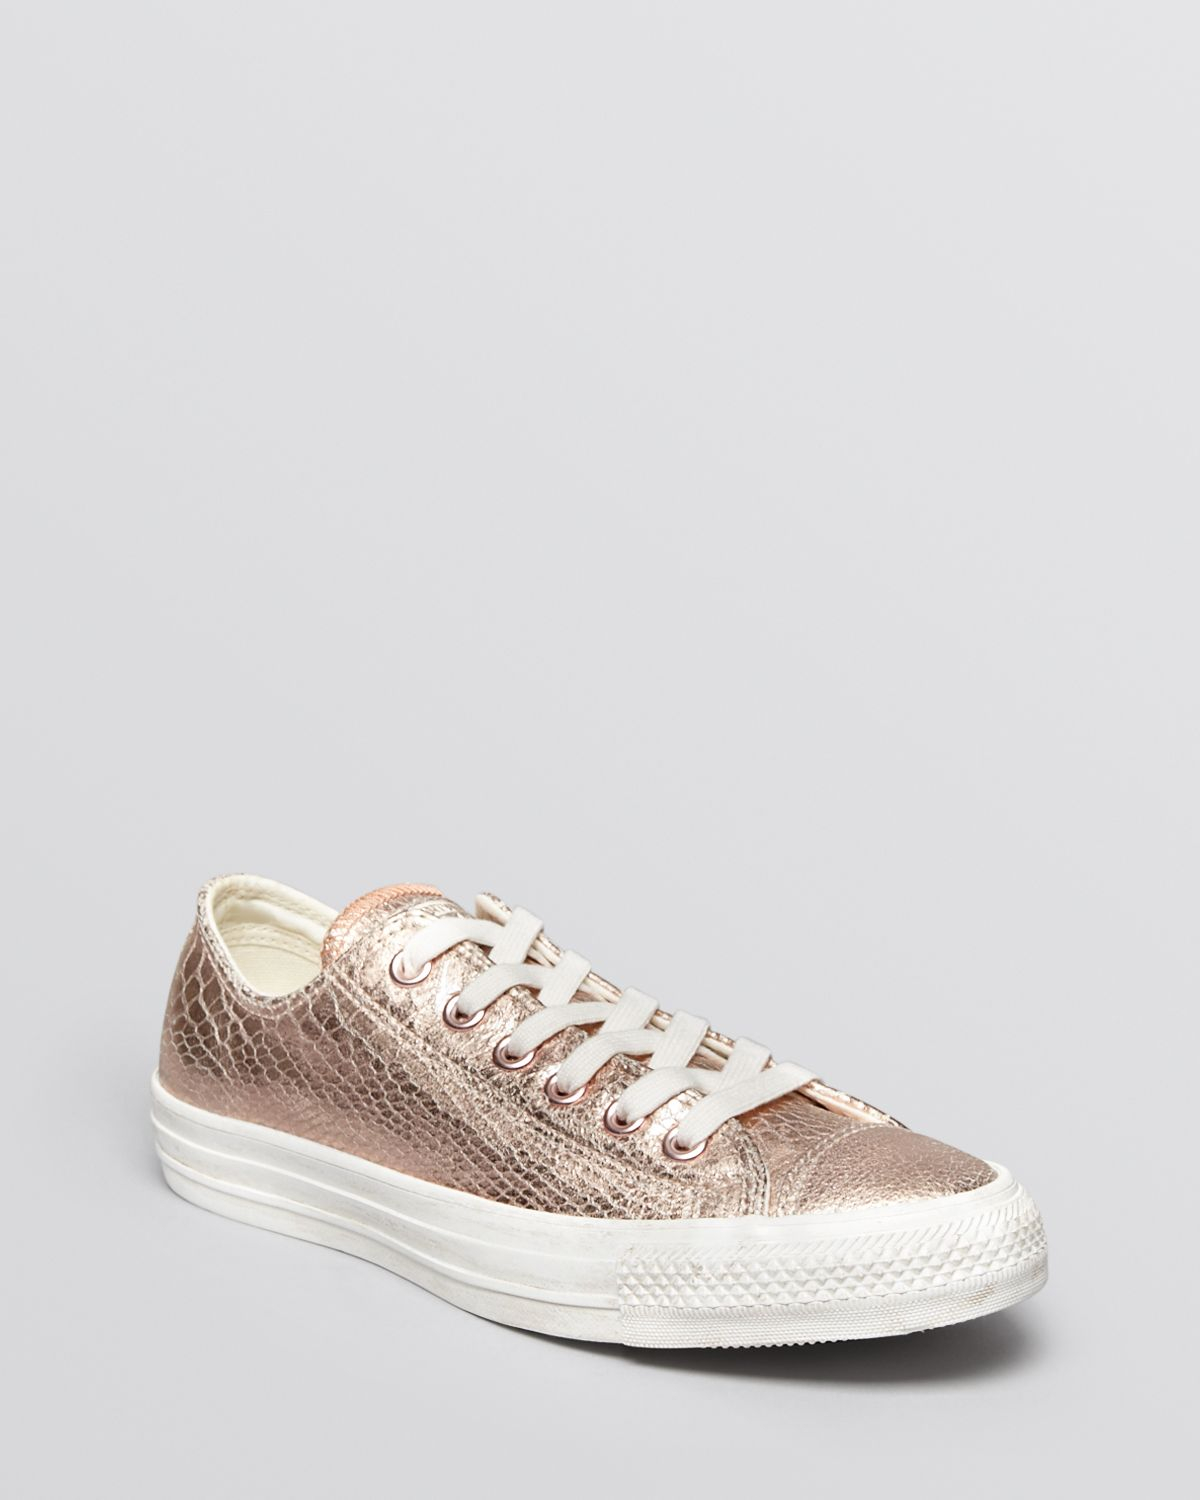 converse white with rose gold